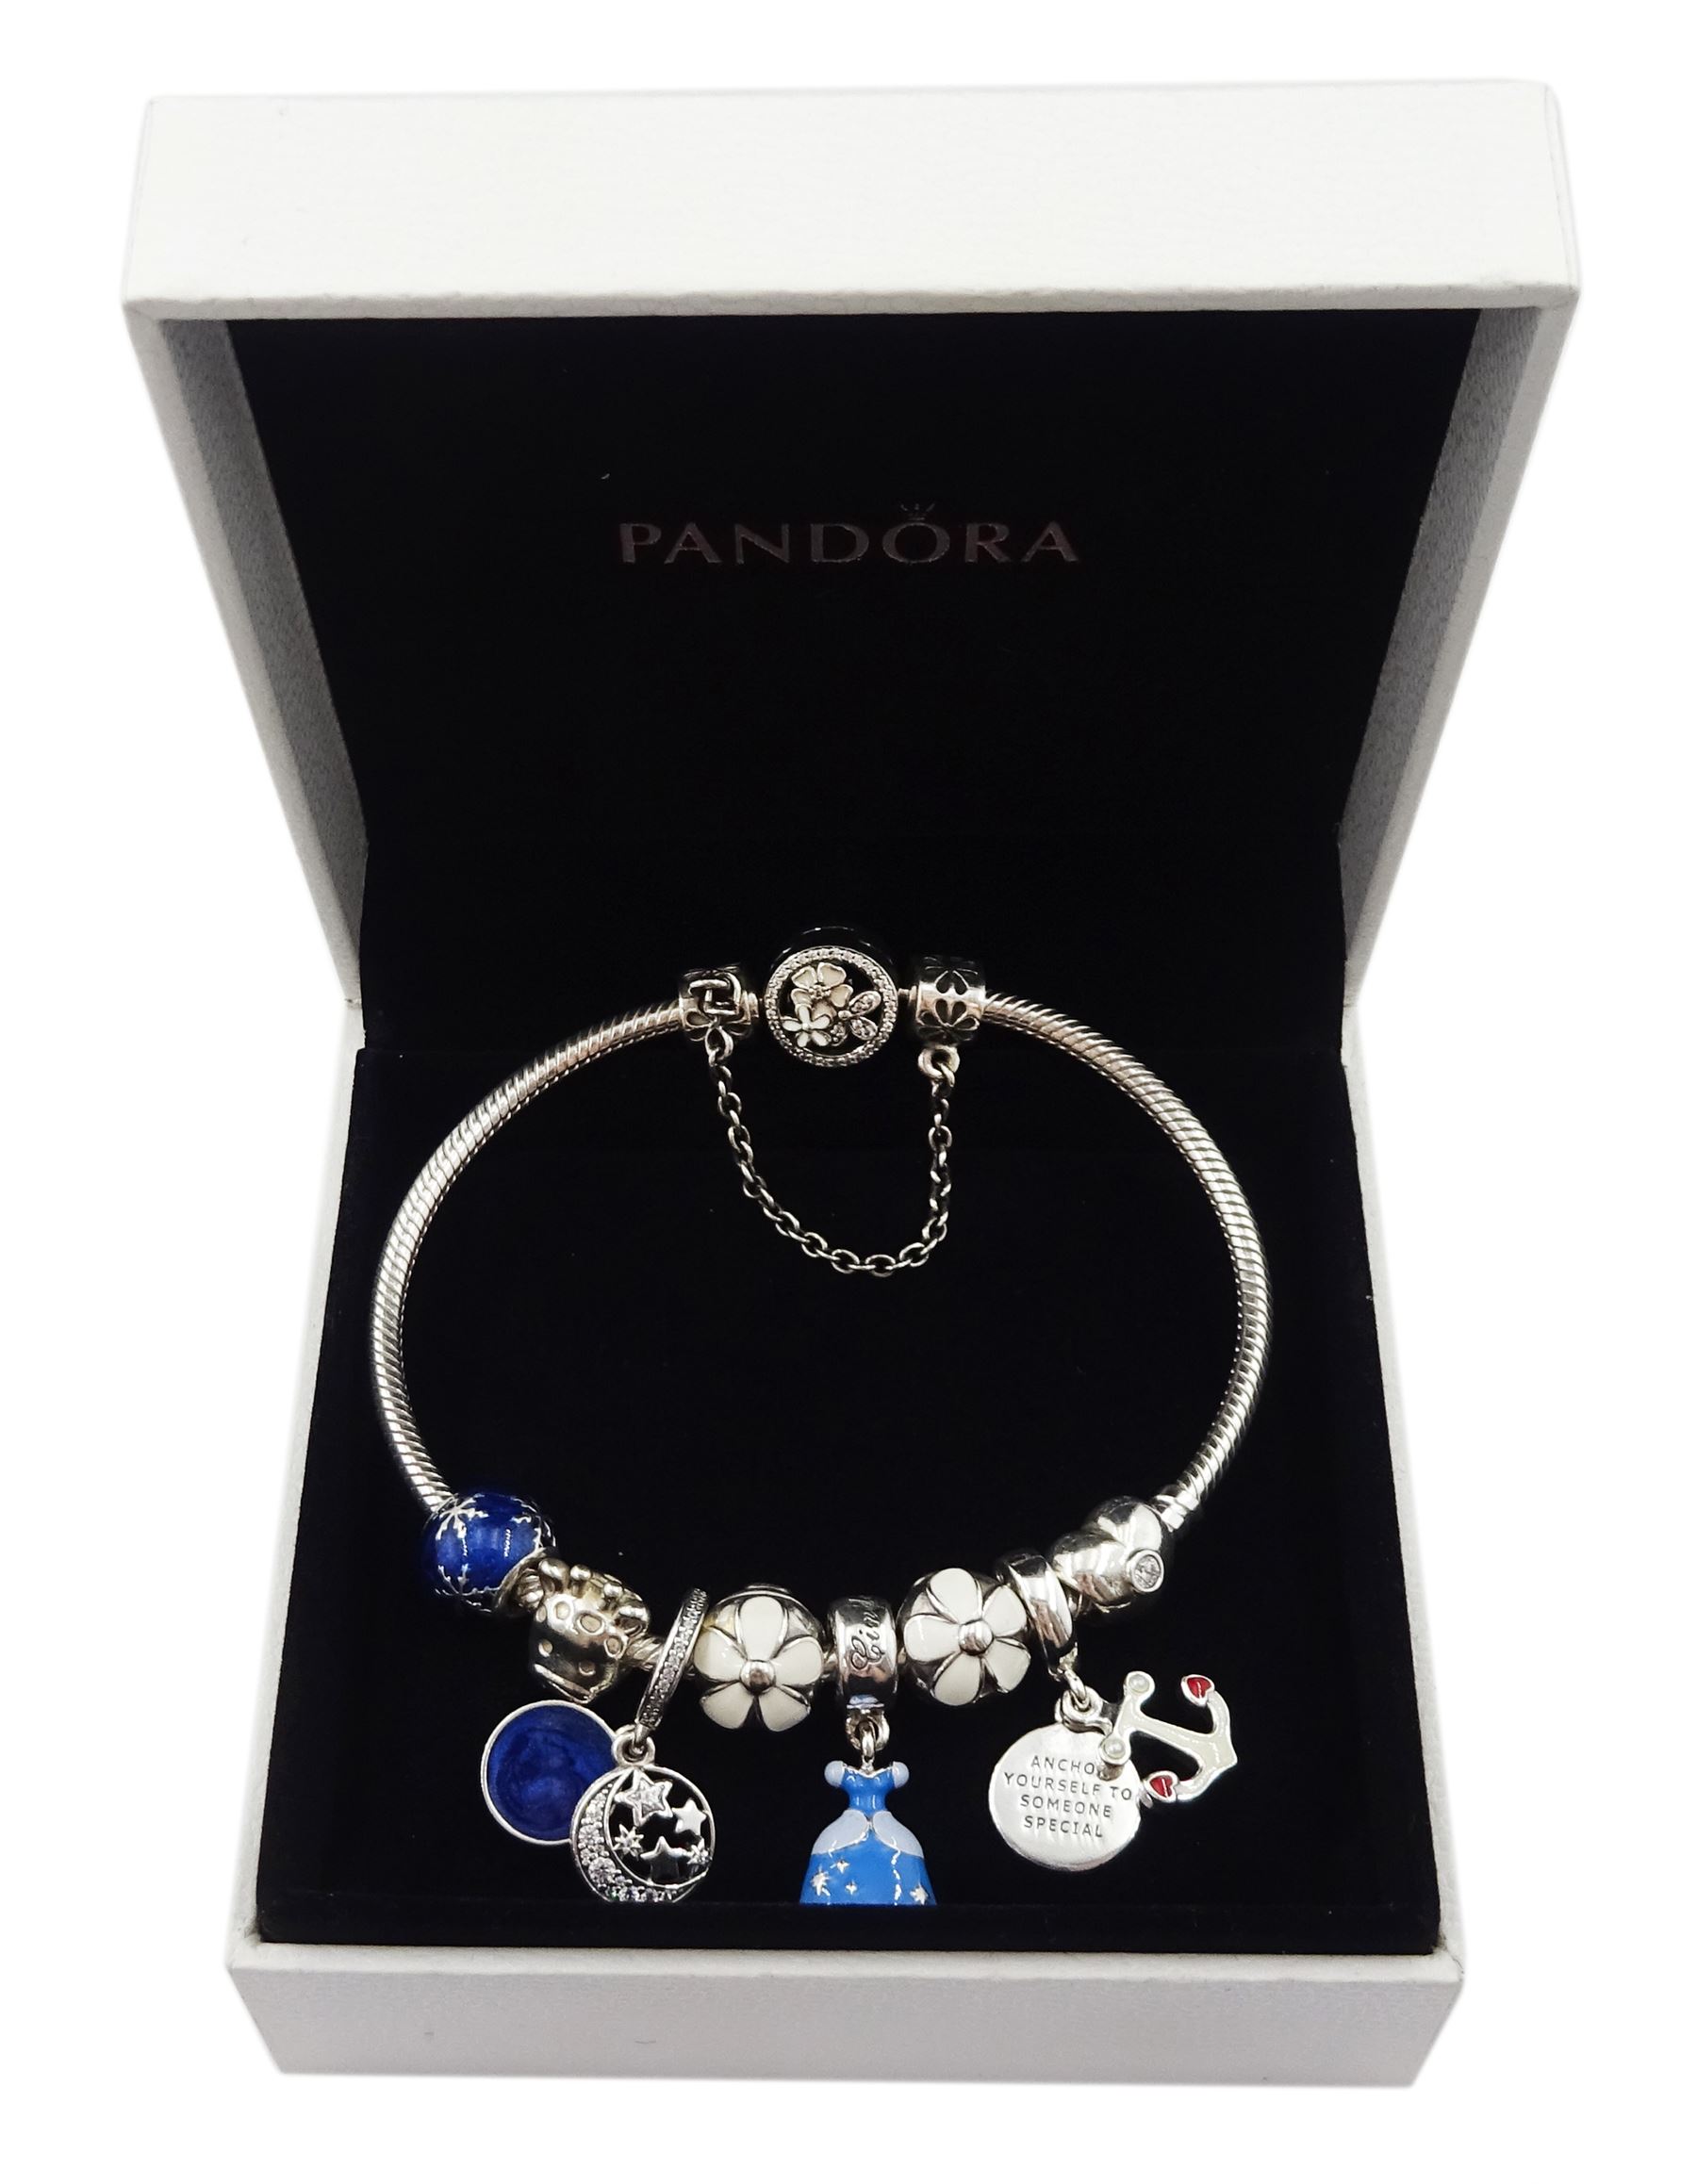 Kæledyr Margaret Mitchell Diplomatiske spørgsmål Pandora Moments flower clasp silver bracelet with Disney Cinderella charm,  seven other Pandora charms, and flower safety chain, boxed - Jewellery,  Watches & Coins